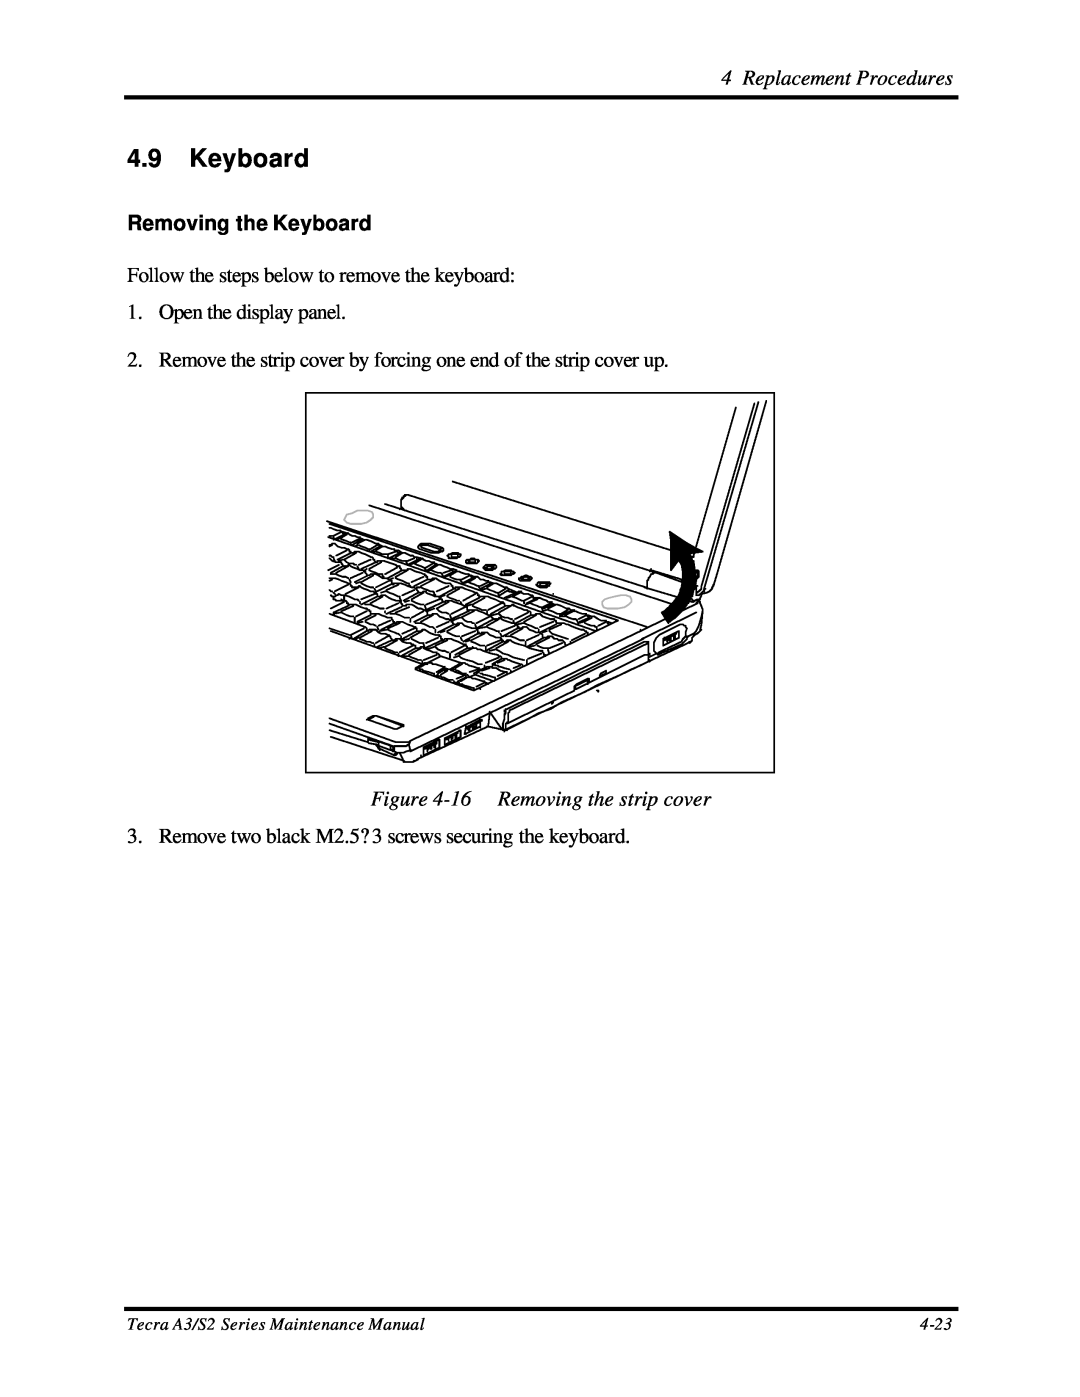 Toshiba S2 manual Removing the Keyboard, 16 Removing the strip cover, Replacement Procedures, 4-23 